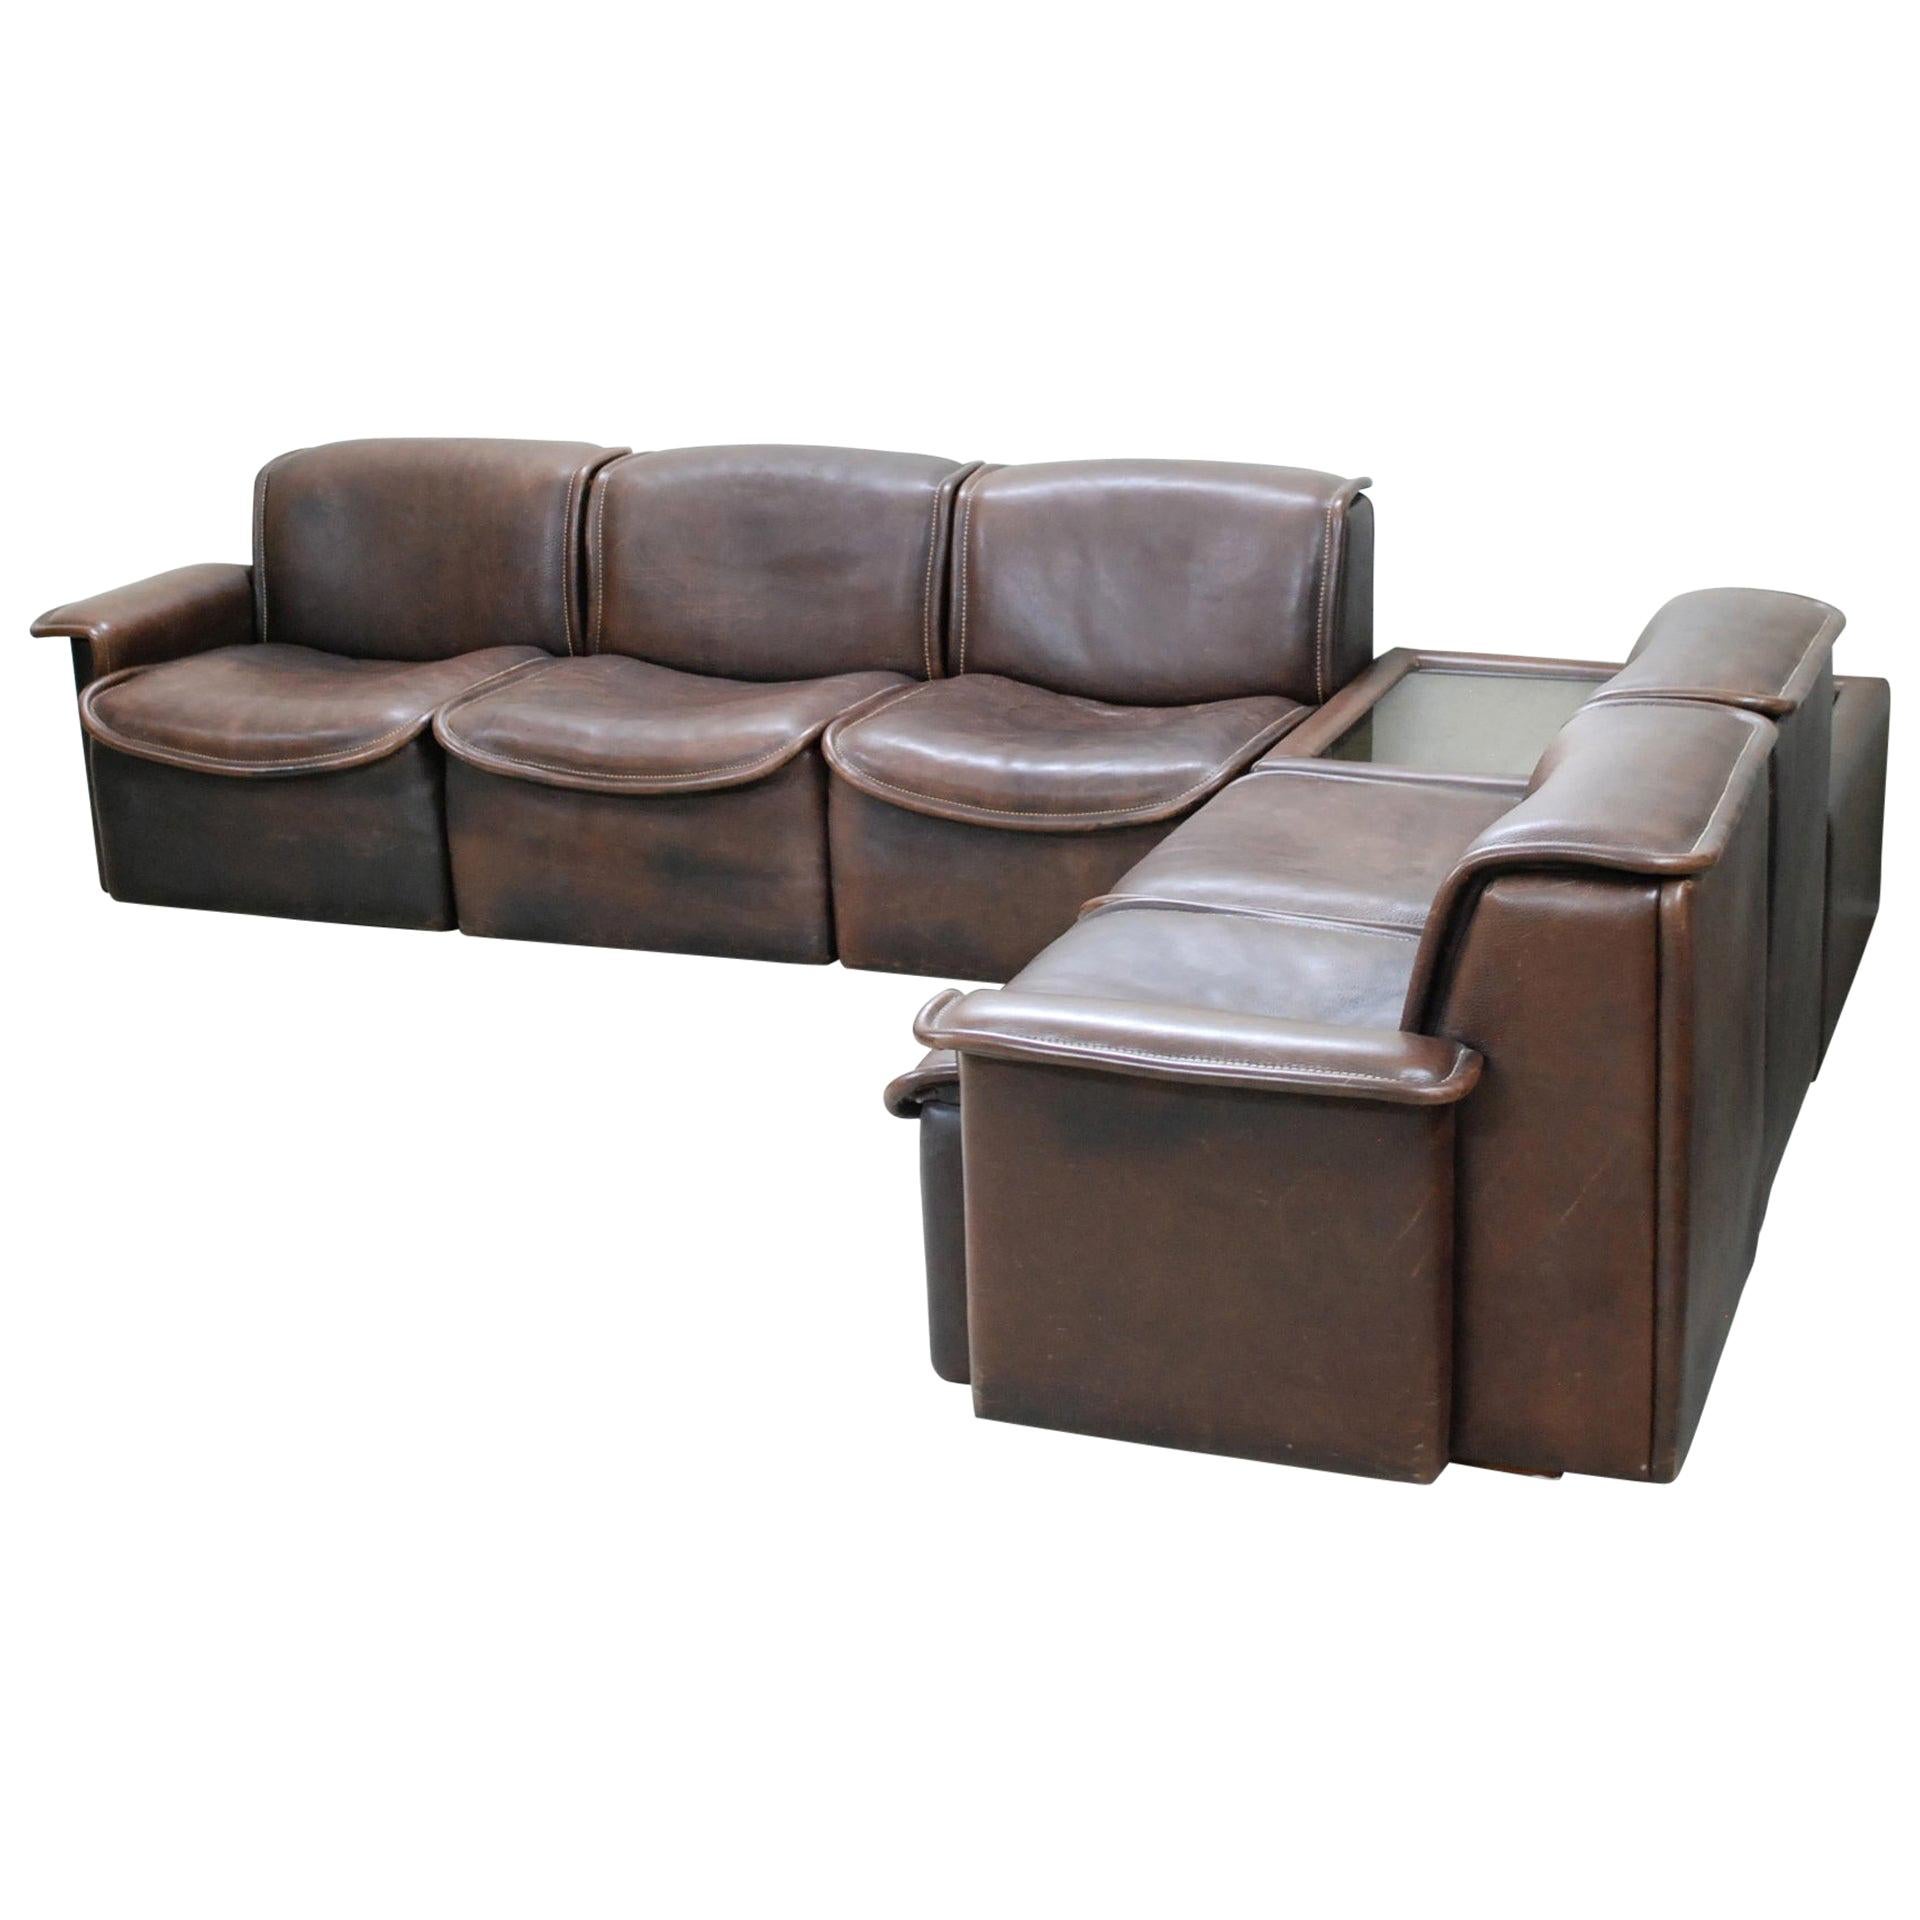 De Sede DS 12 Modular Vintage Neck Leather Sofa Brown and Coffee Table